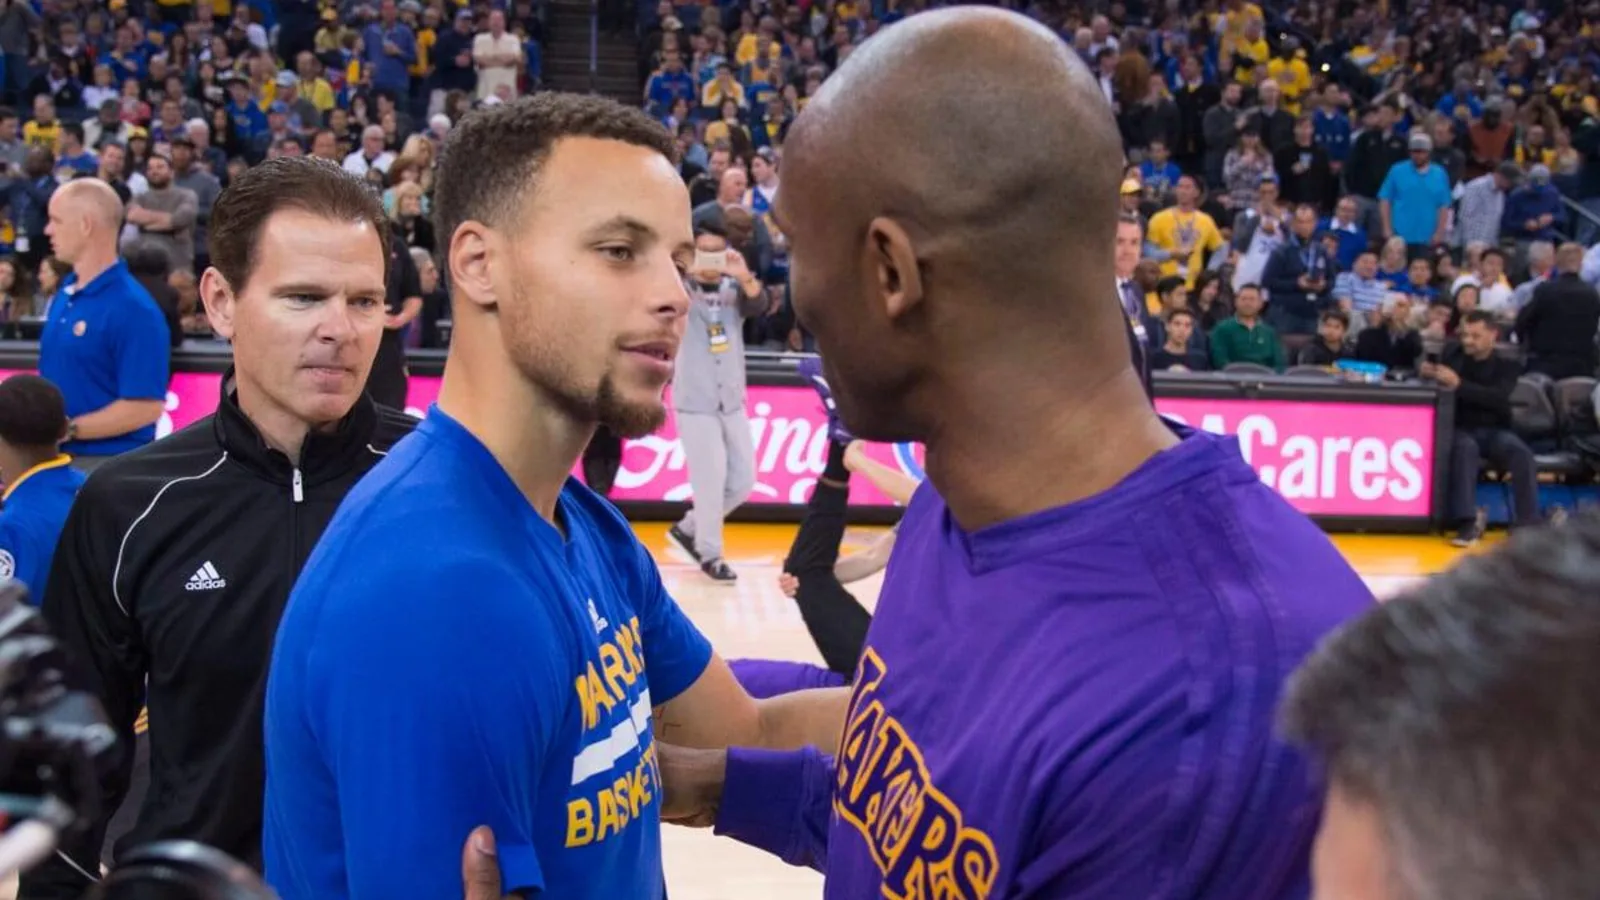 Stephen Curry reveals special moment he shared with Kobe Bryant